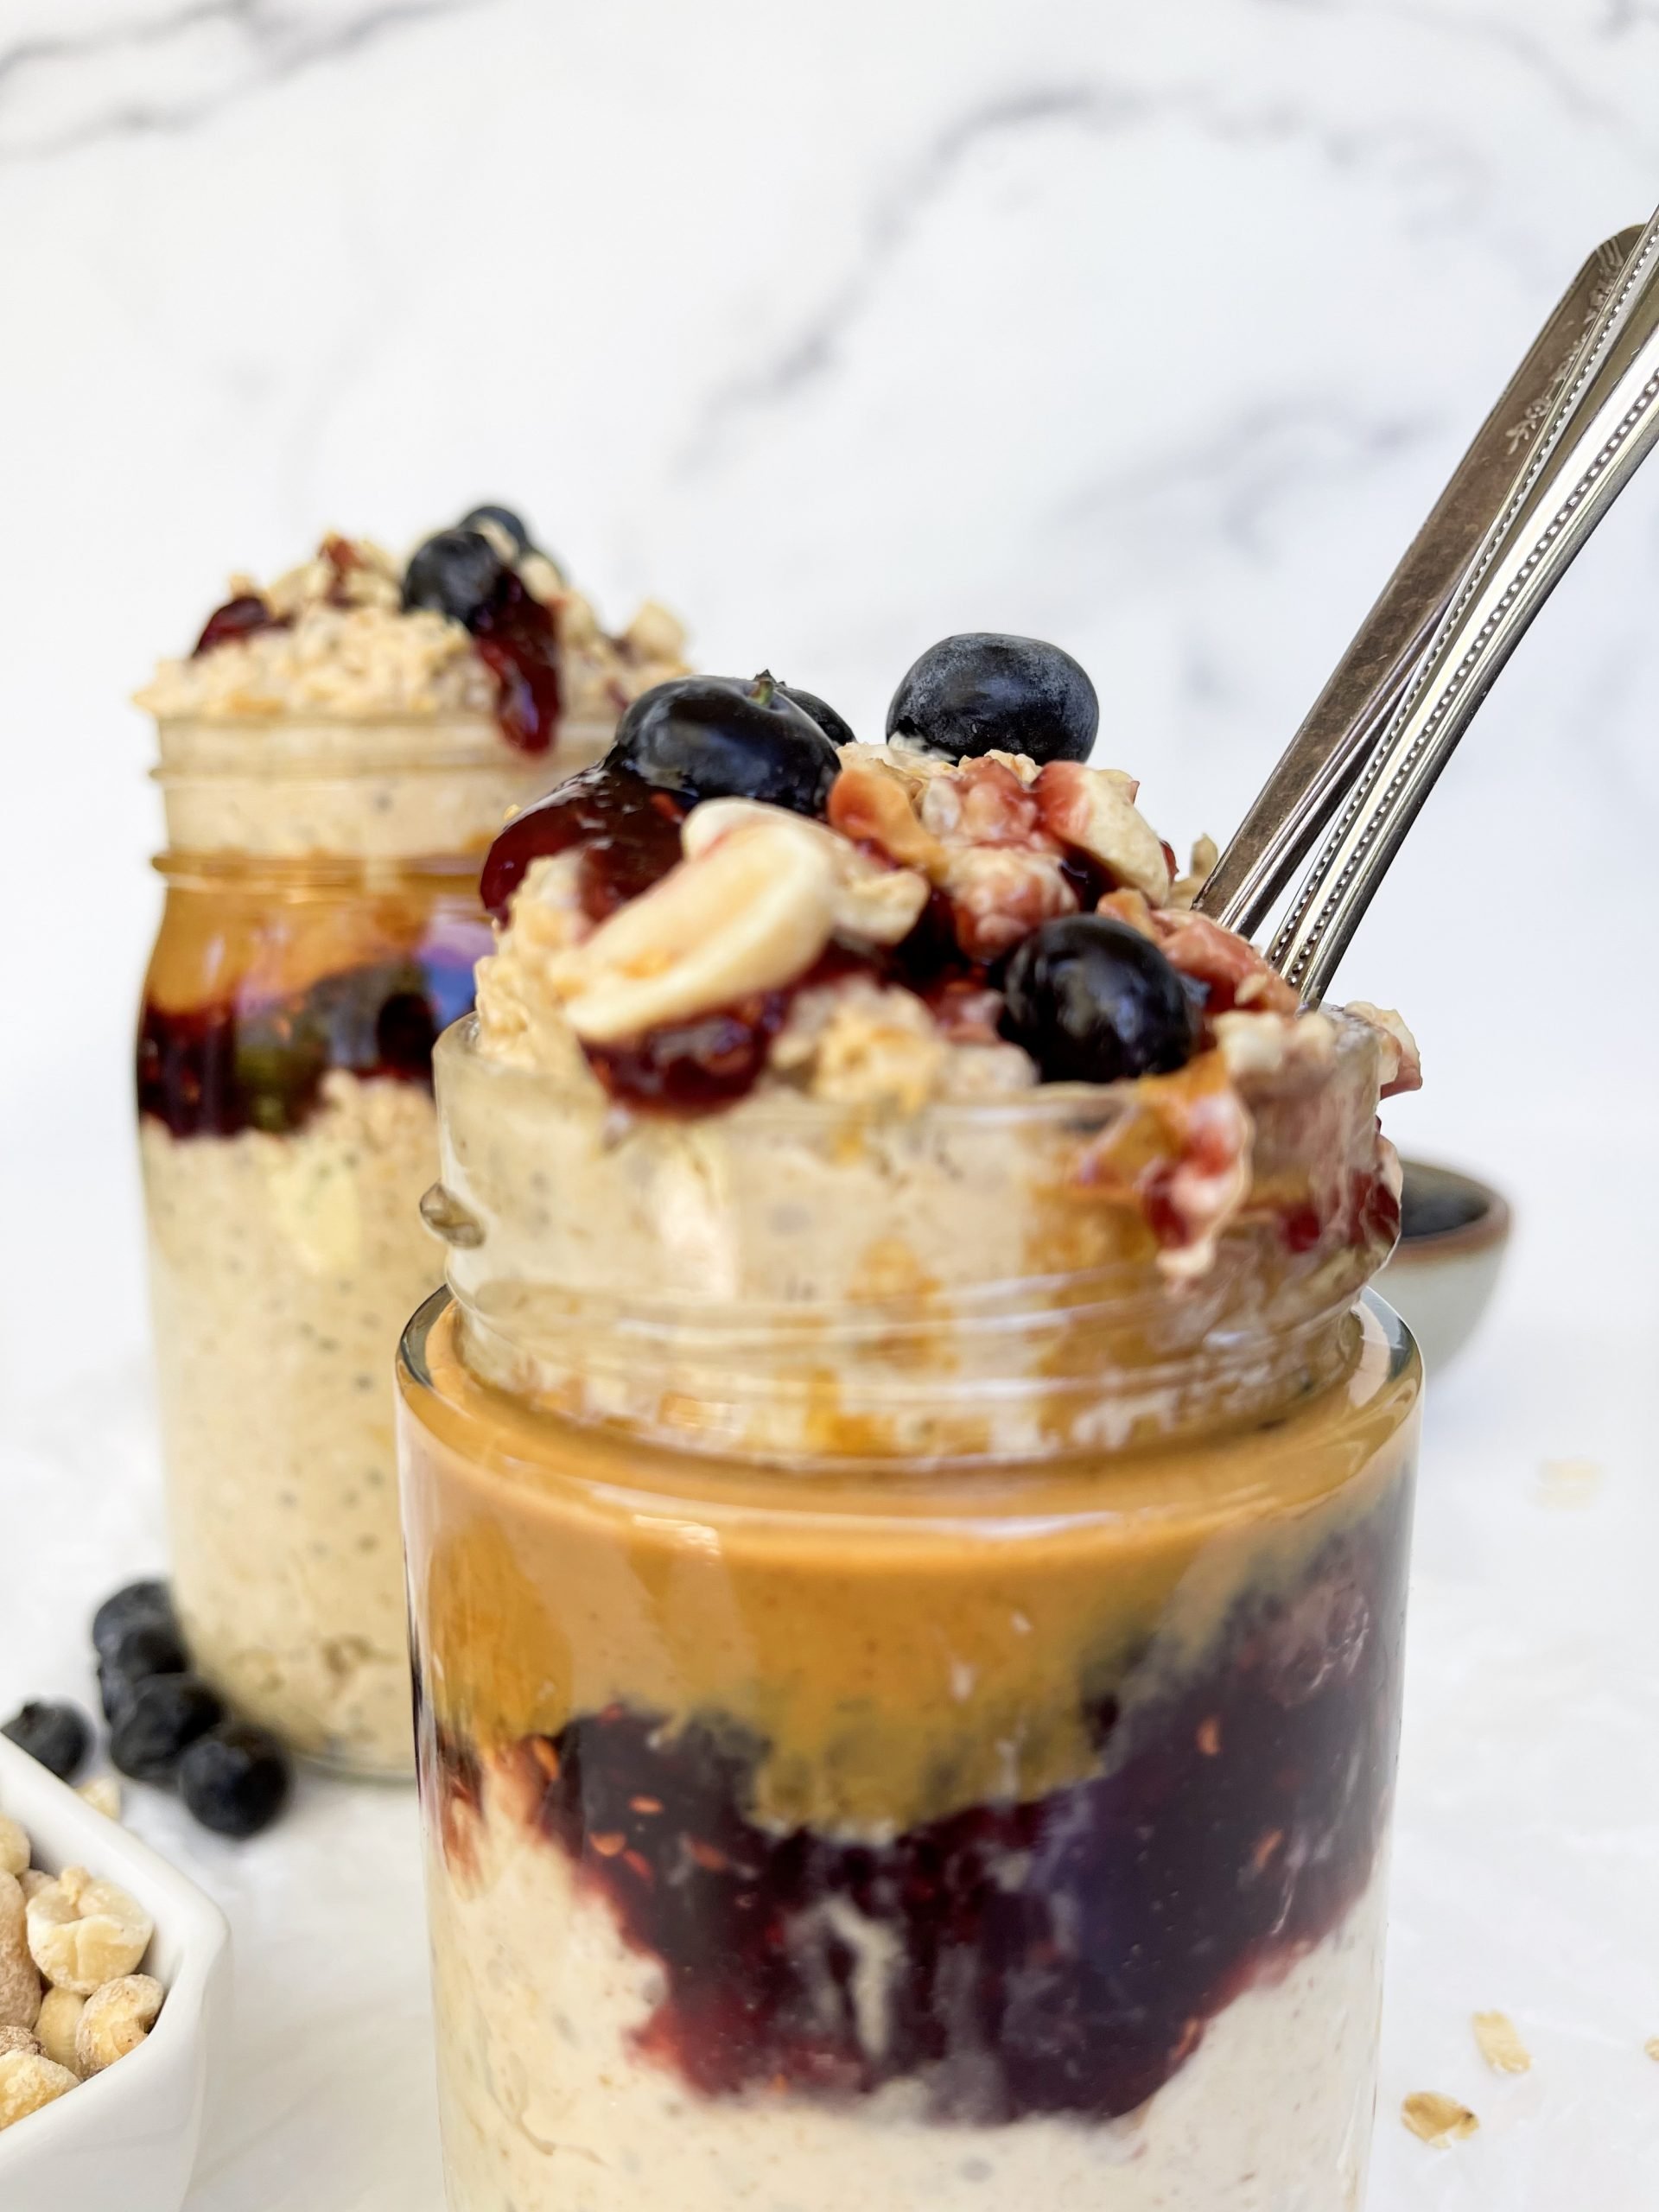 Peanut Butter Cup Overnight Oats (+Protein) - Secretly Healthy Home